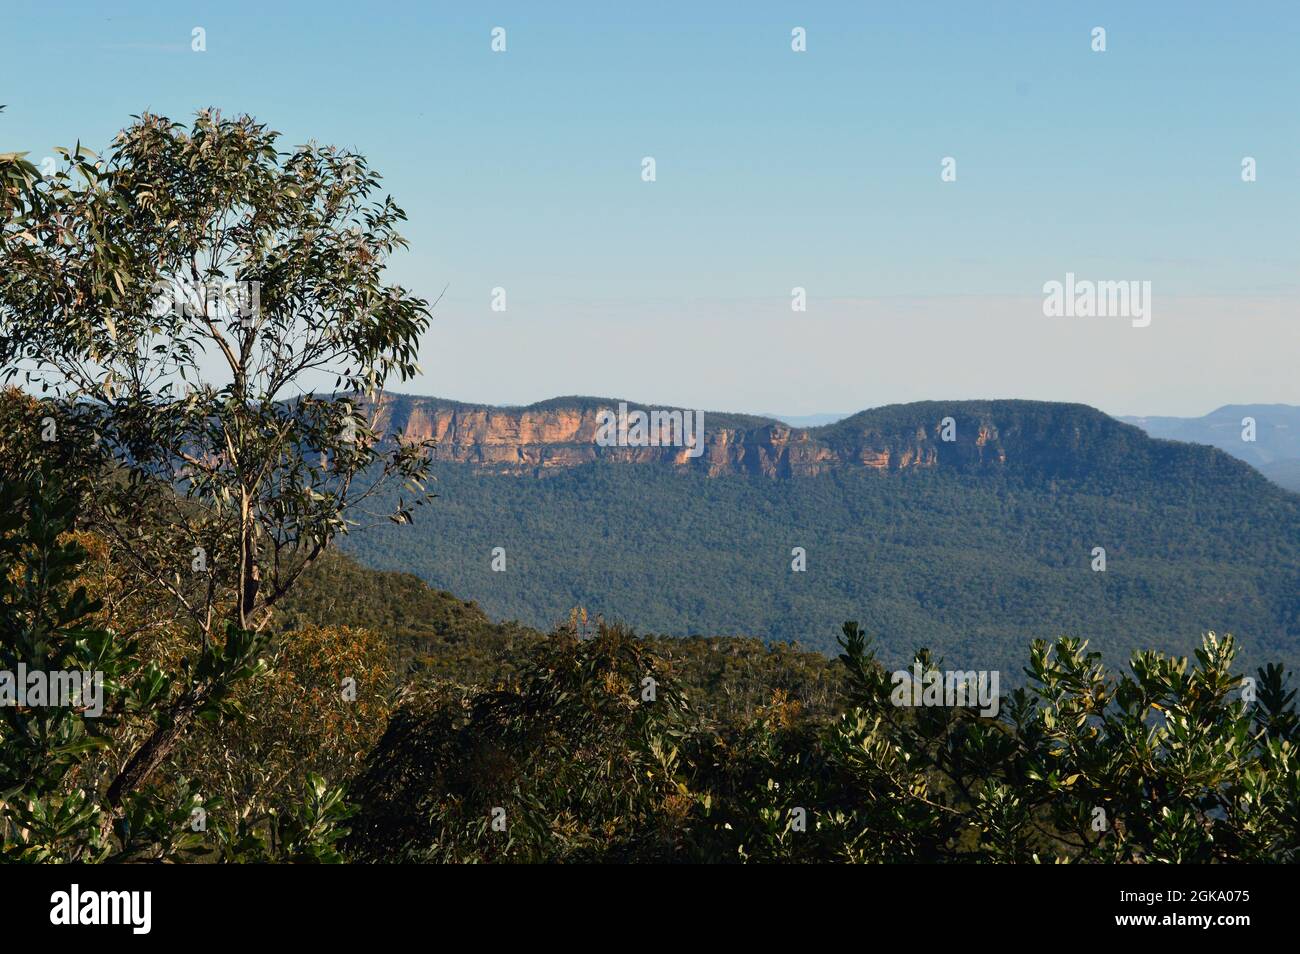 A view into the Jamison Valley From the Golf Course Lookout at Leura Stock Photo